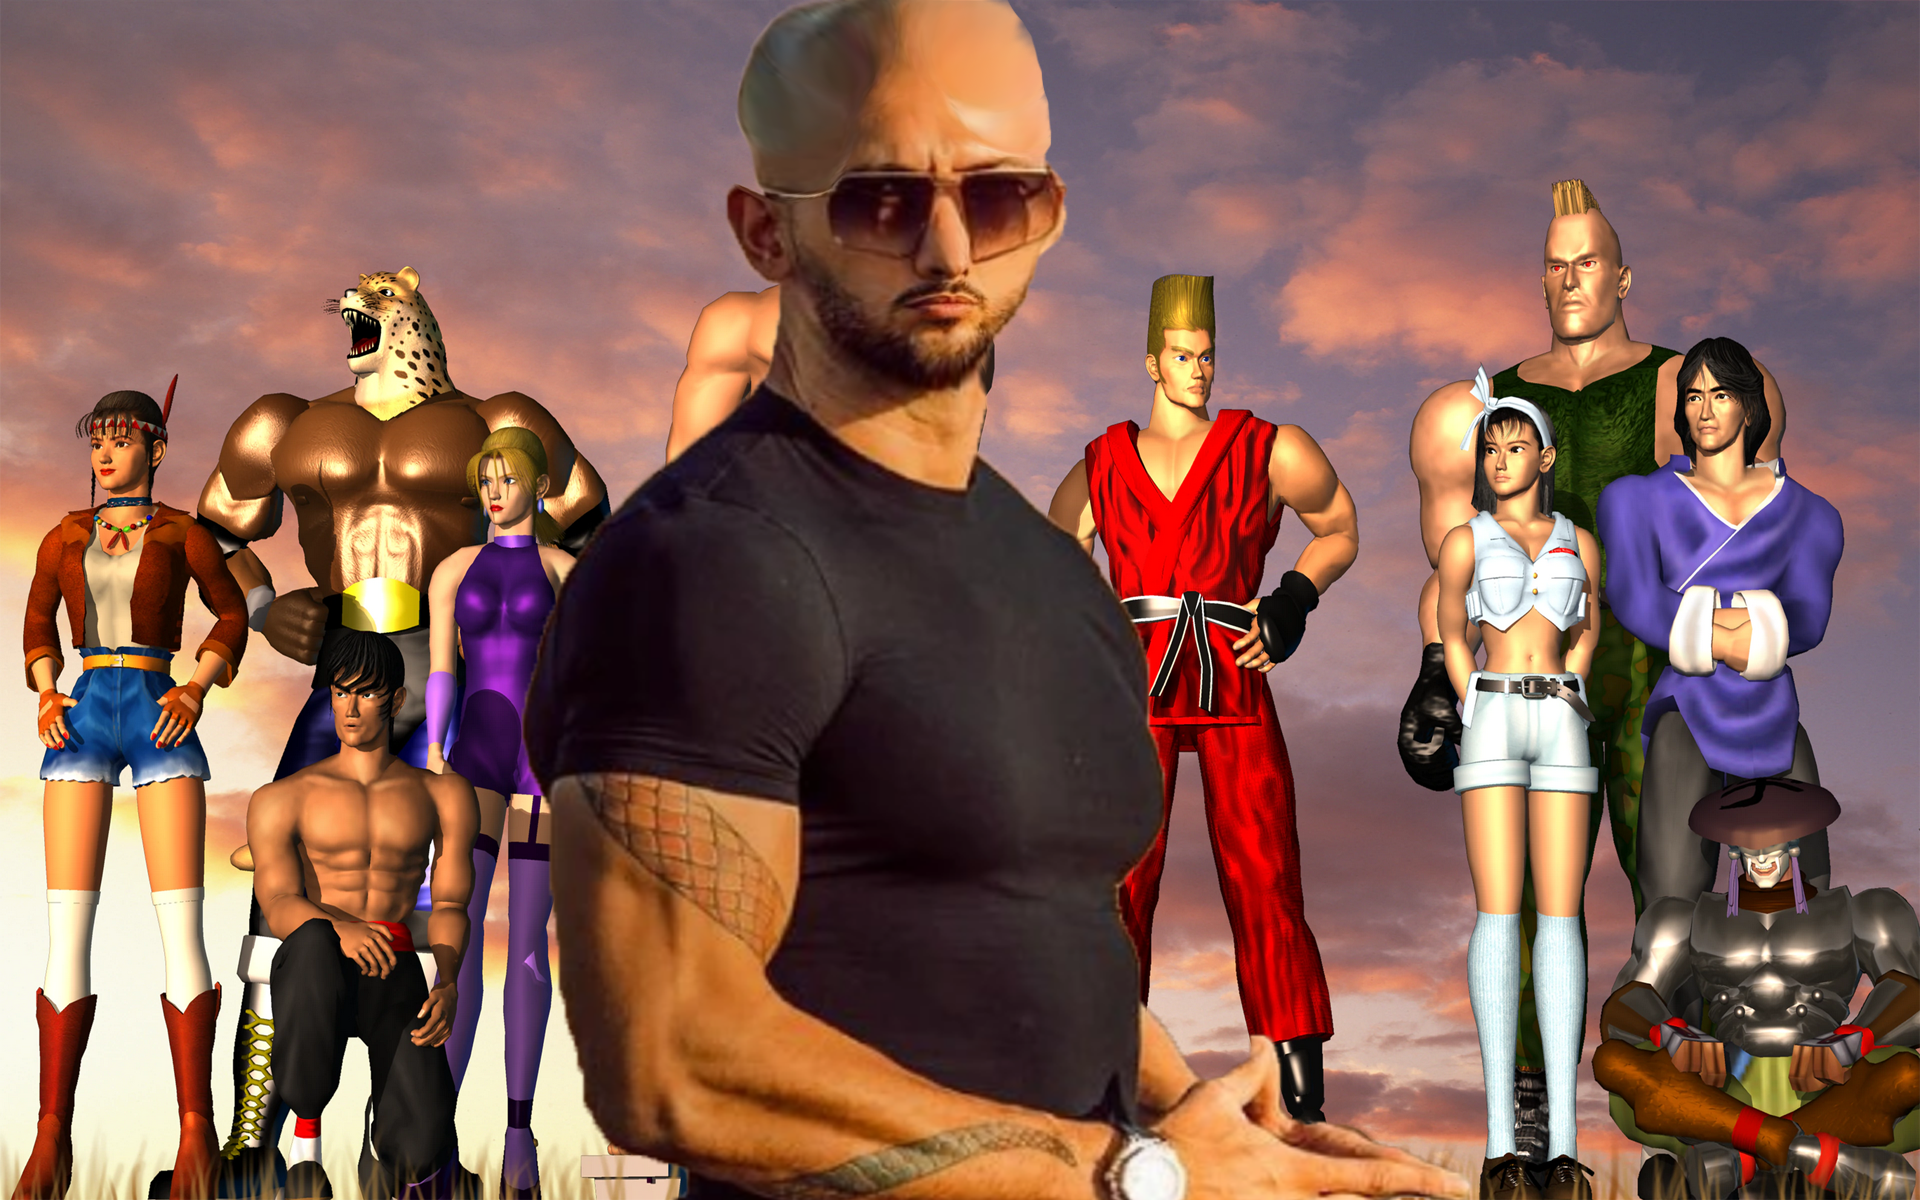 Andrew Tate Turns Down Appearing in Tekken Because "There Are Women In The Game"